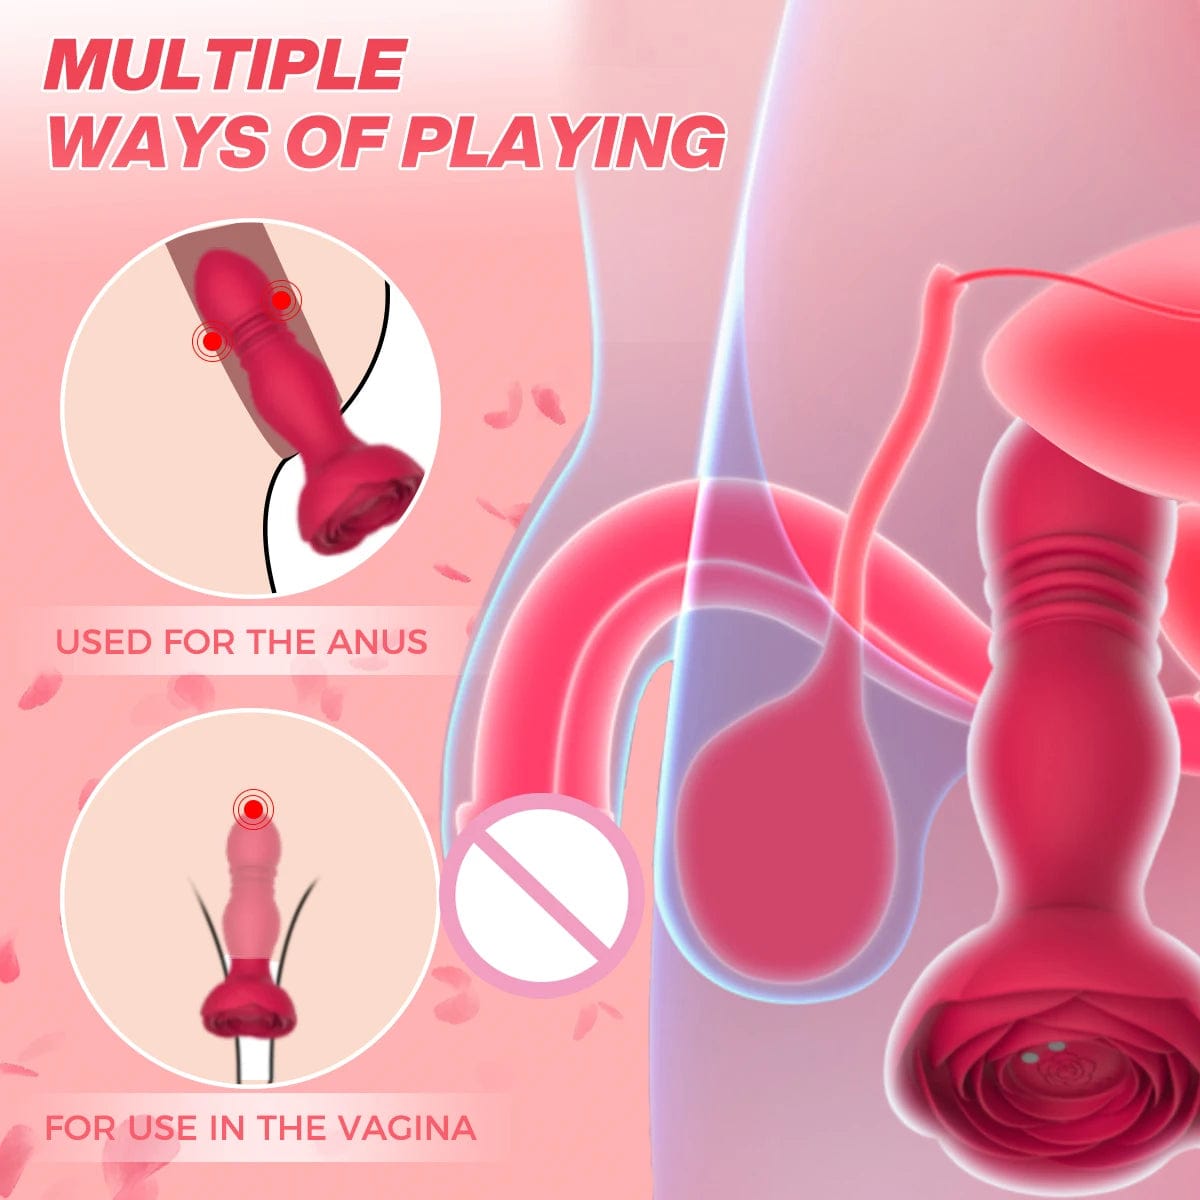 Thrusting Rose Plug with 10 vibration patterns, two in-built vibrators, and a thrusting motion for intense anal pleasure.